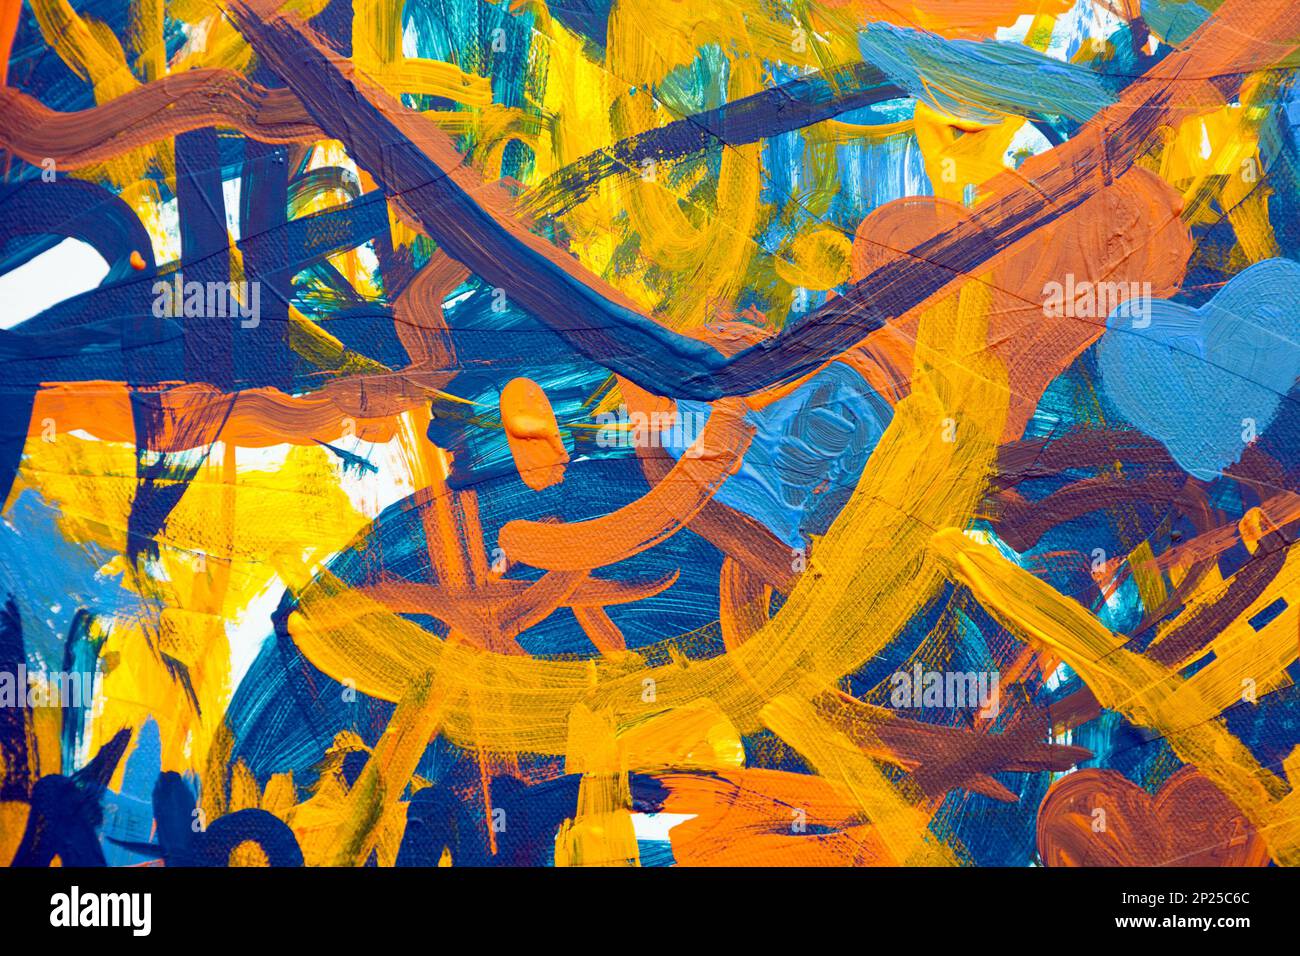 Colorful abstract oil painting made by children. Yellow, orange and blue chaotic brush strokes on a childish drawing. Messy infantile scribble close-u Stock Photo